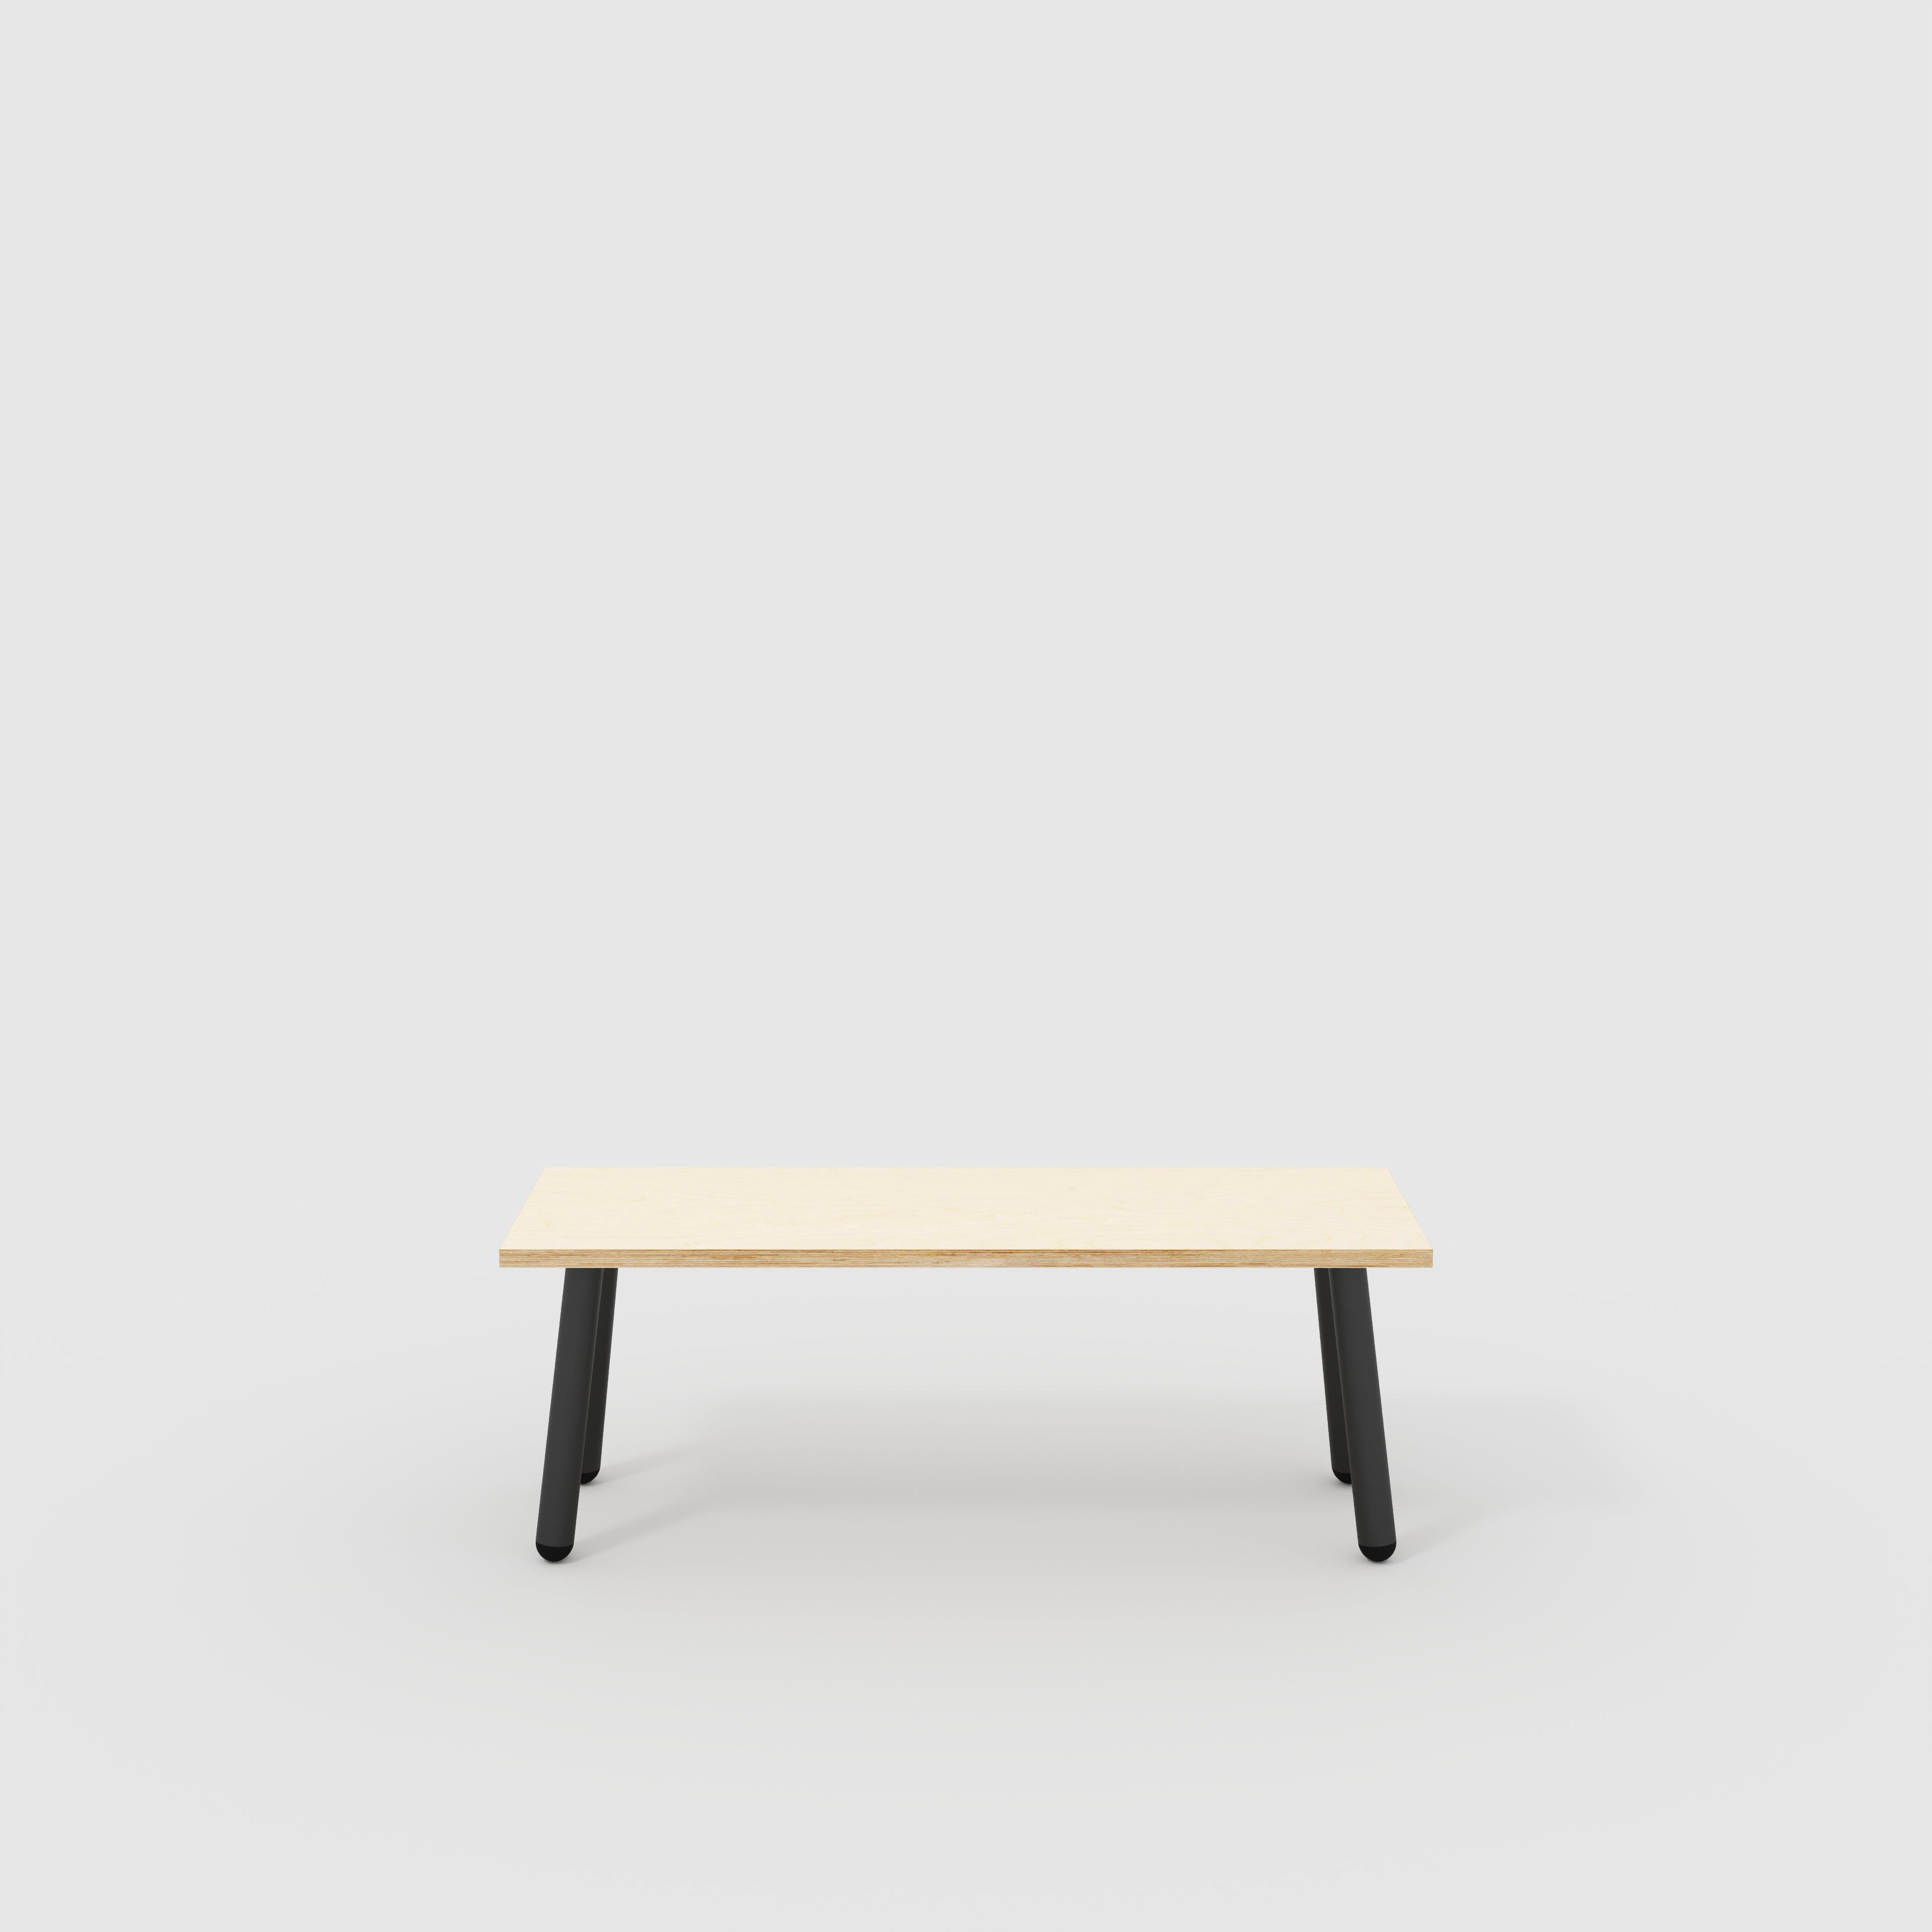 Bench Seat with Black Round Single Pin Legs - Plywood Birch - 1200(w) x 400(d)